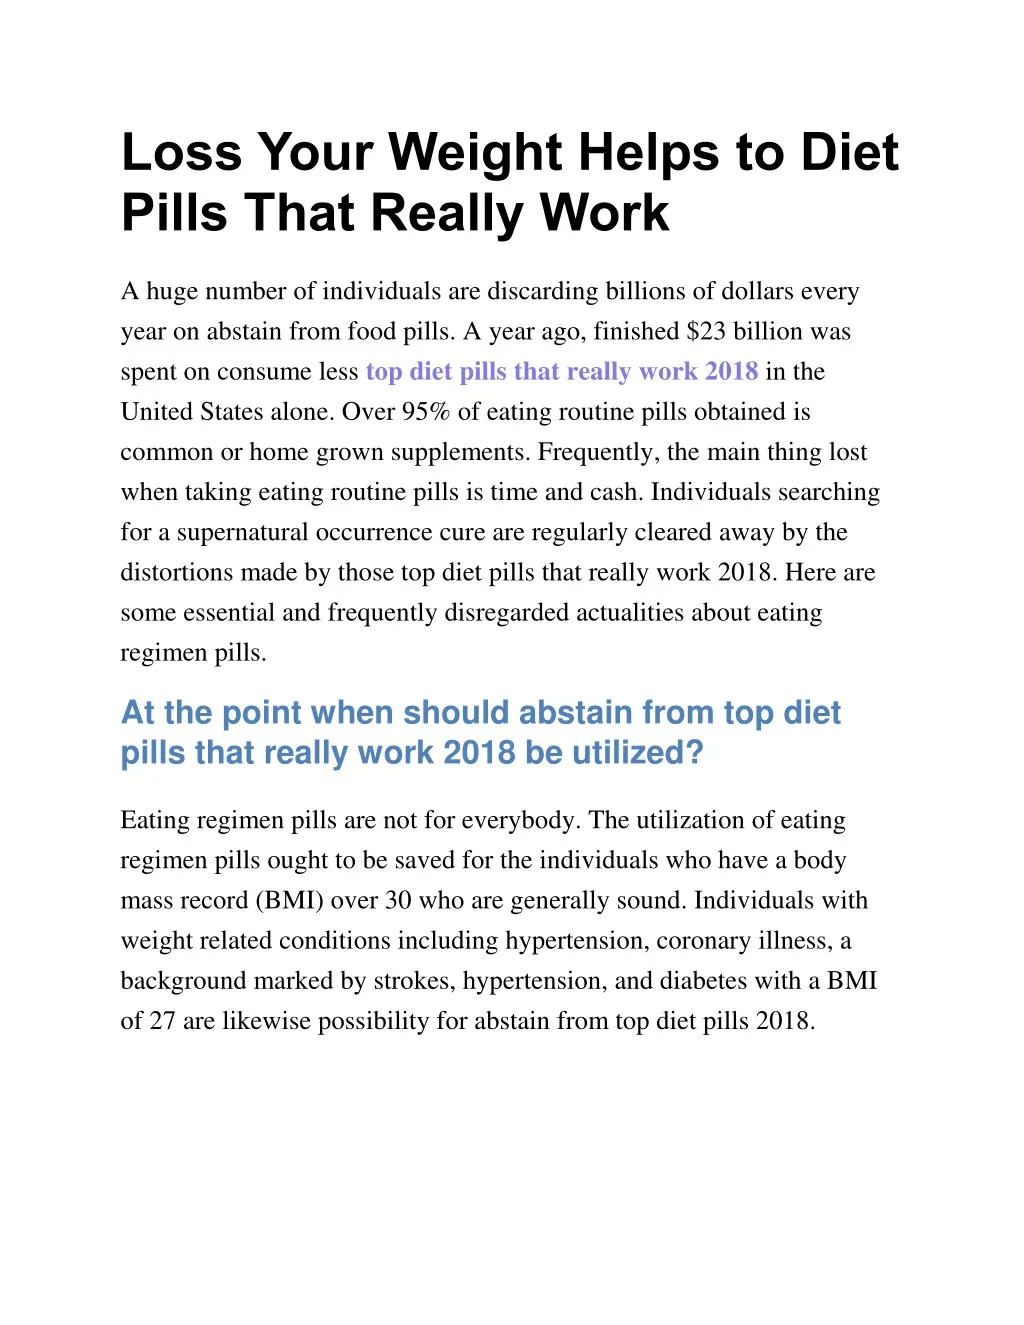 loss your weight helps to diet pills that really